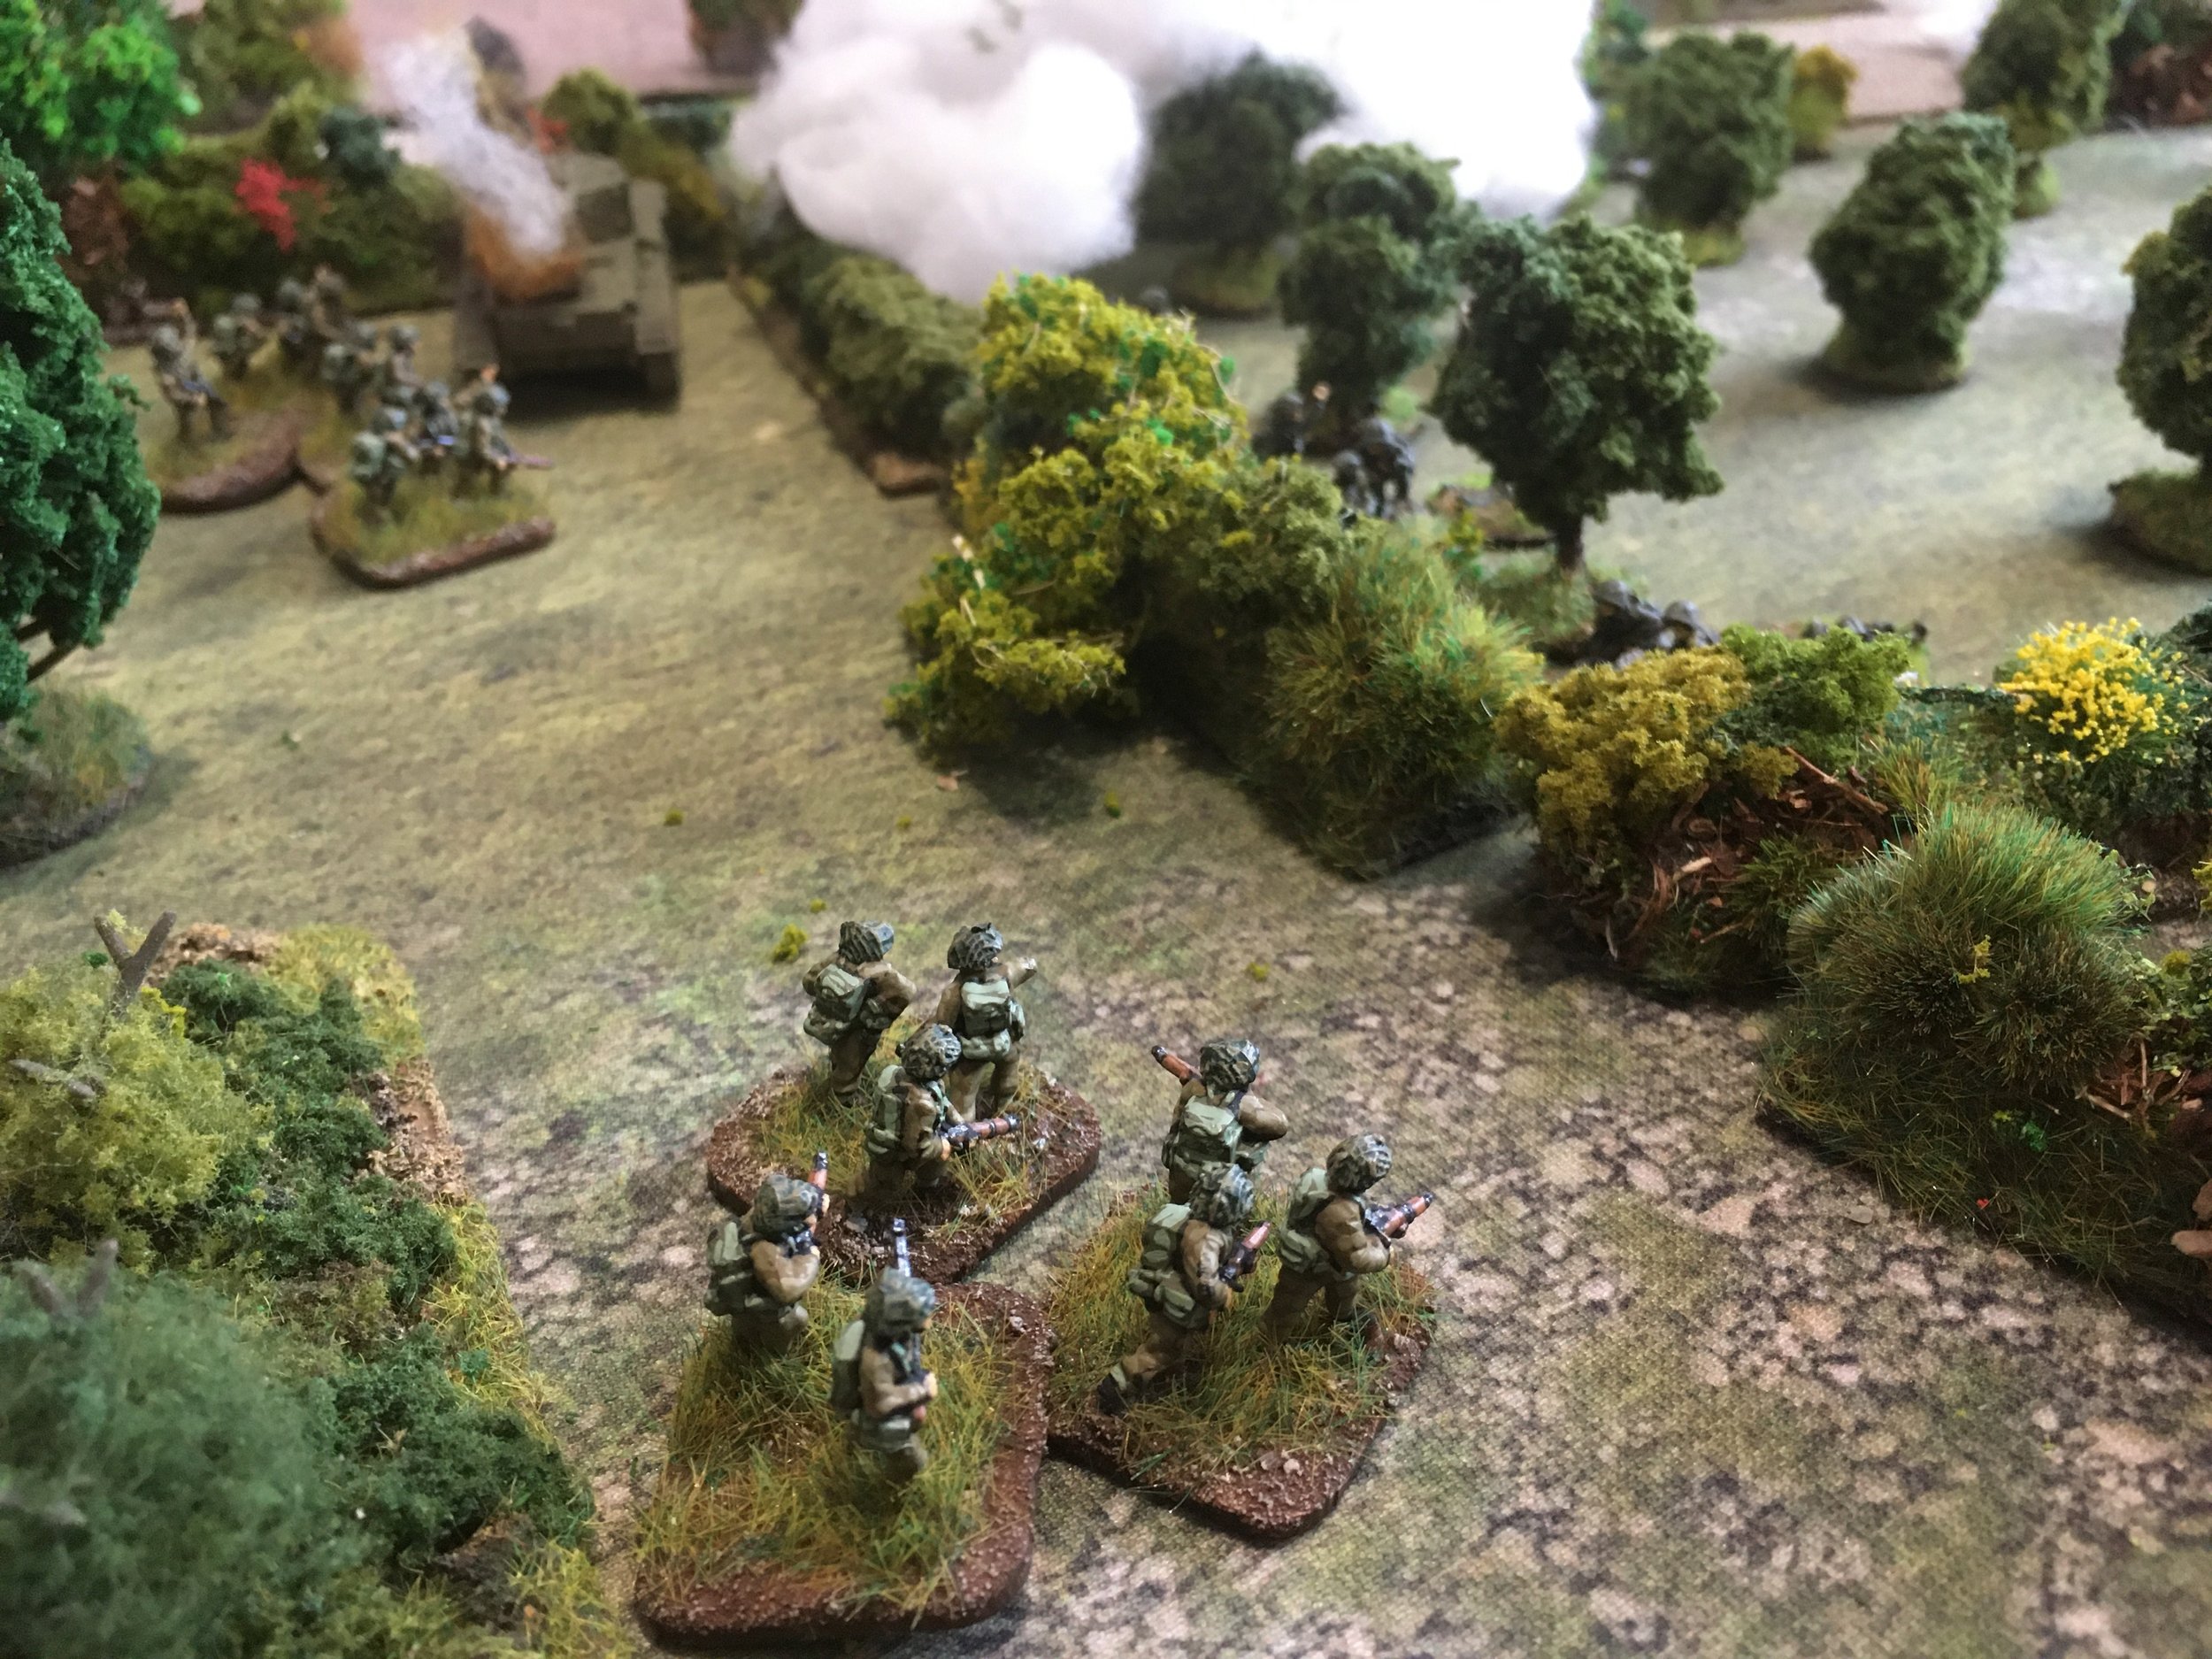 Despite the loss of another Cromwell, the infantry continued to uphold Welsh honour and advanced onto the abandoned German infantry position.